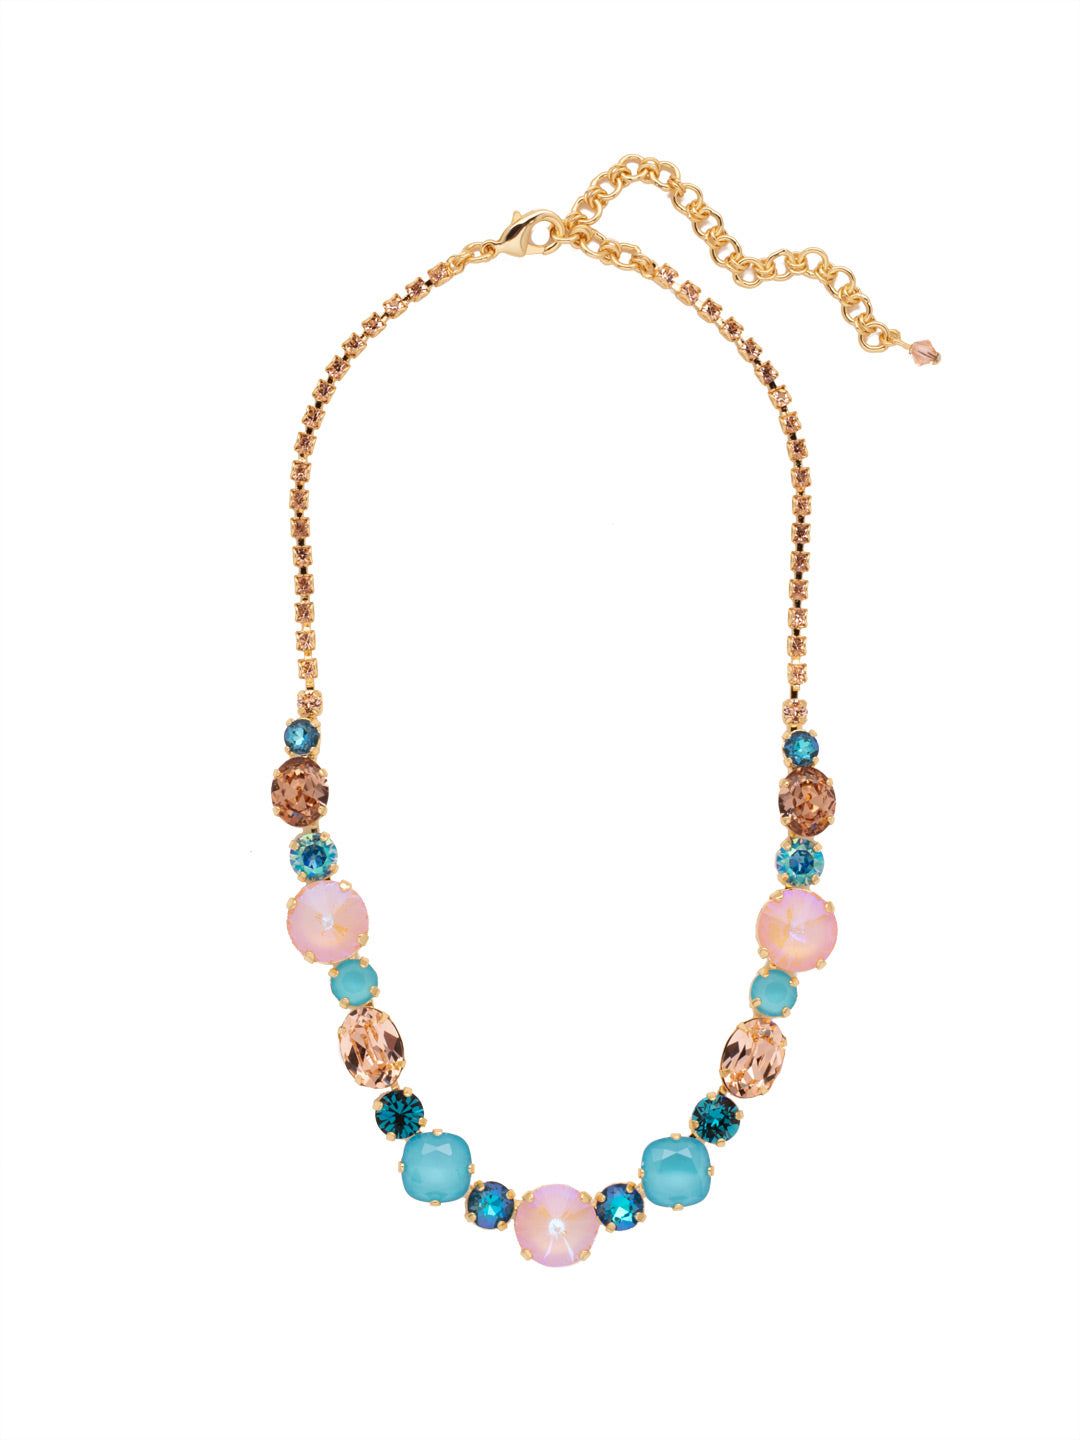 Full Circle Statement Necklace - NDQ43BGSOP - <p>Need a look that goes full circle? Three circular rivoli crystals mix with other round and oval gems in this everyday stunner. A rhinestone chain completes the look for all-around allure. From Sorrelli's South Pacific collection in our Bright Gold-tone finish.</p>